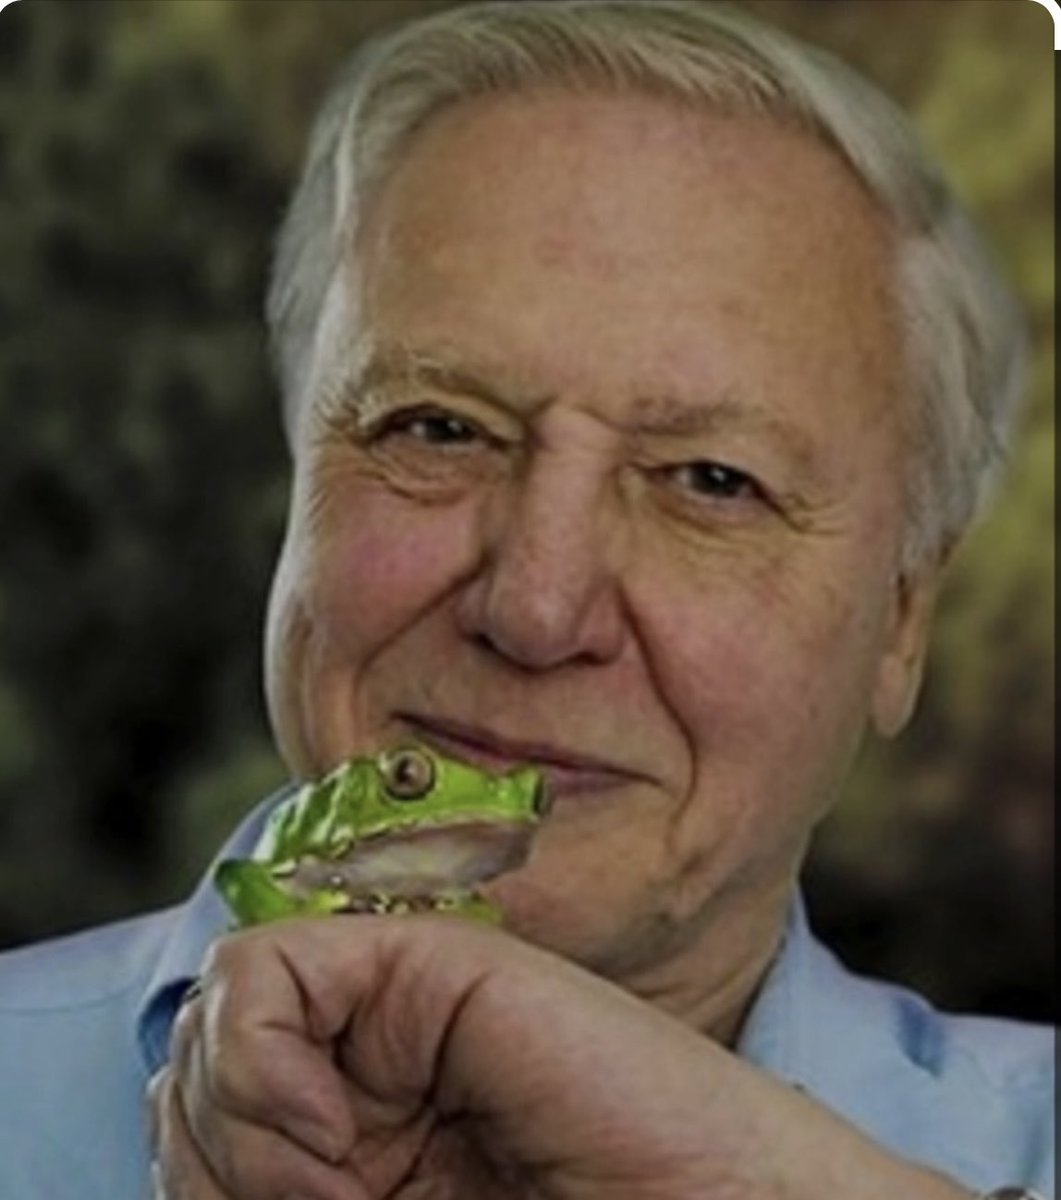 A very happy 98th birthday to #SirDavidAttenborough the best man at the #BBC. Long may he continue. 👏🏻👏🏻👏🏻👏🏻👏🏻👏🏻👏🏻👏🏻👏🏻👏🏻👏🏻👏🏻